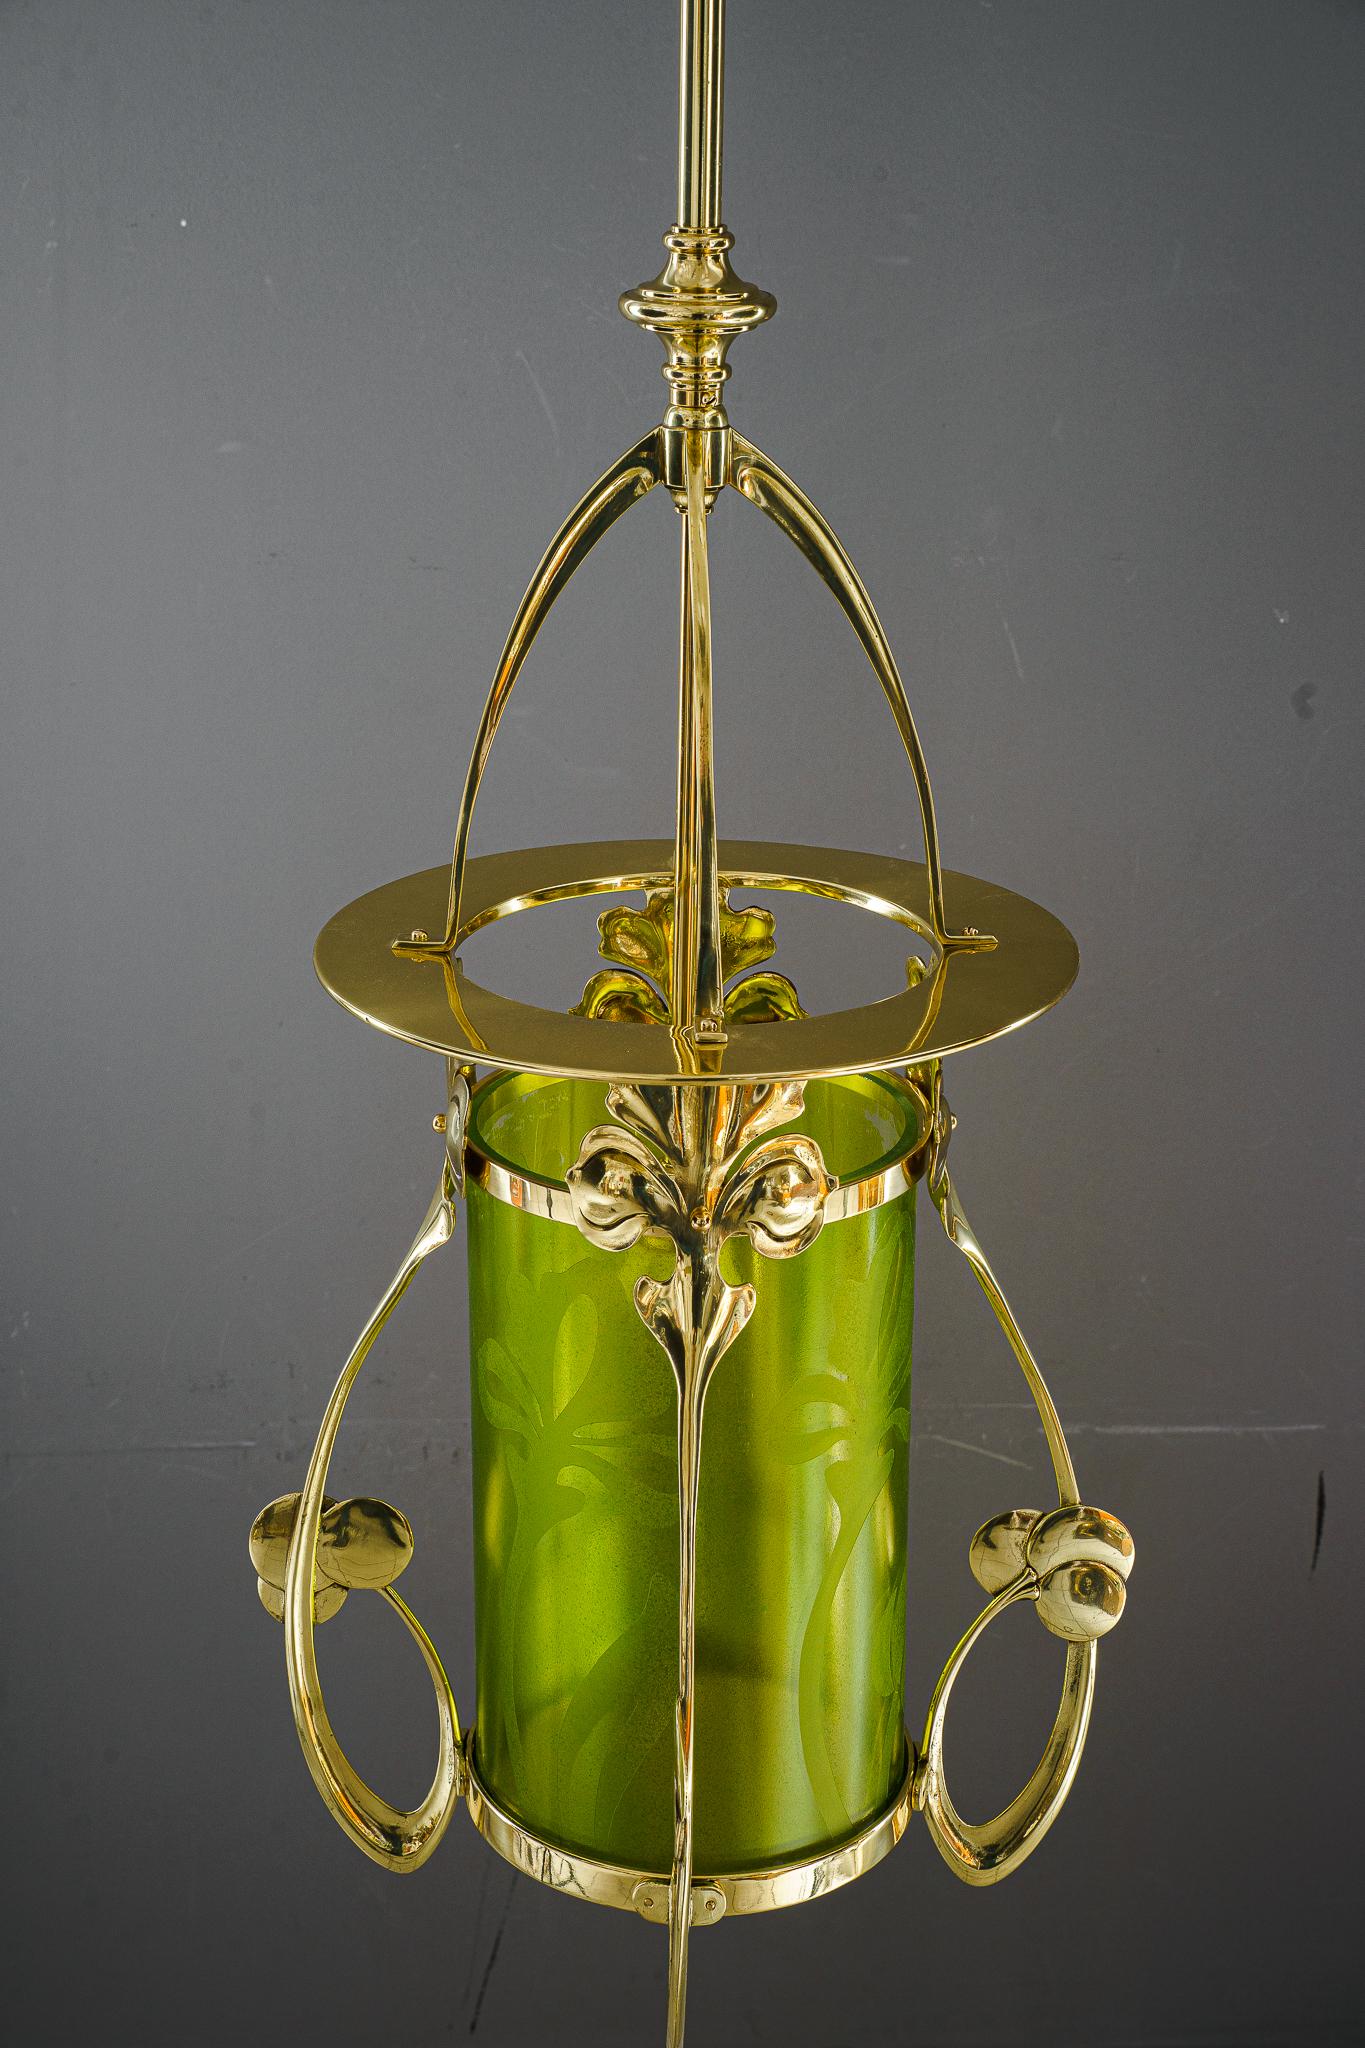 Jugendstil Pendant with hand painted glass shade vienna around 1908
Brass polished and stove enameled
Original glass shade